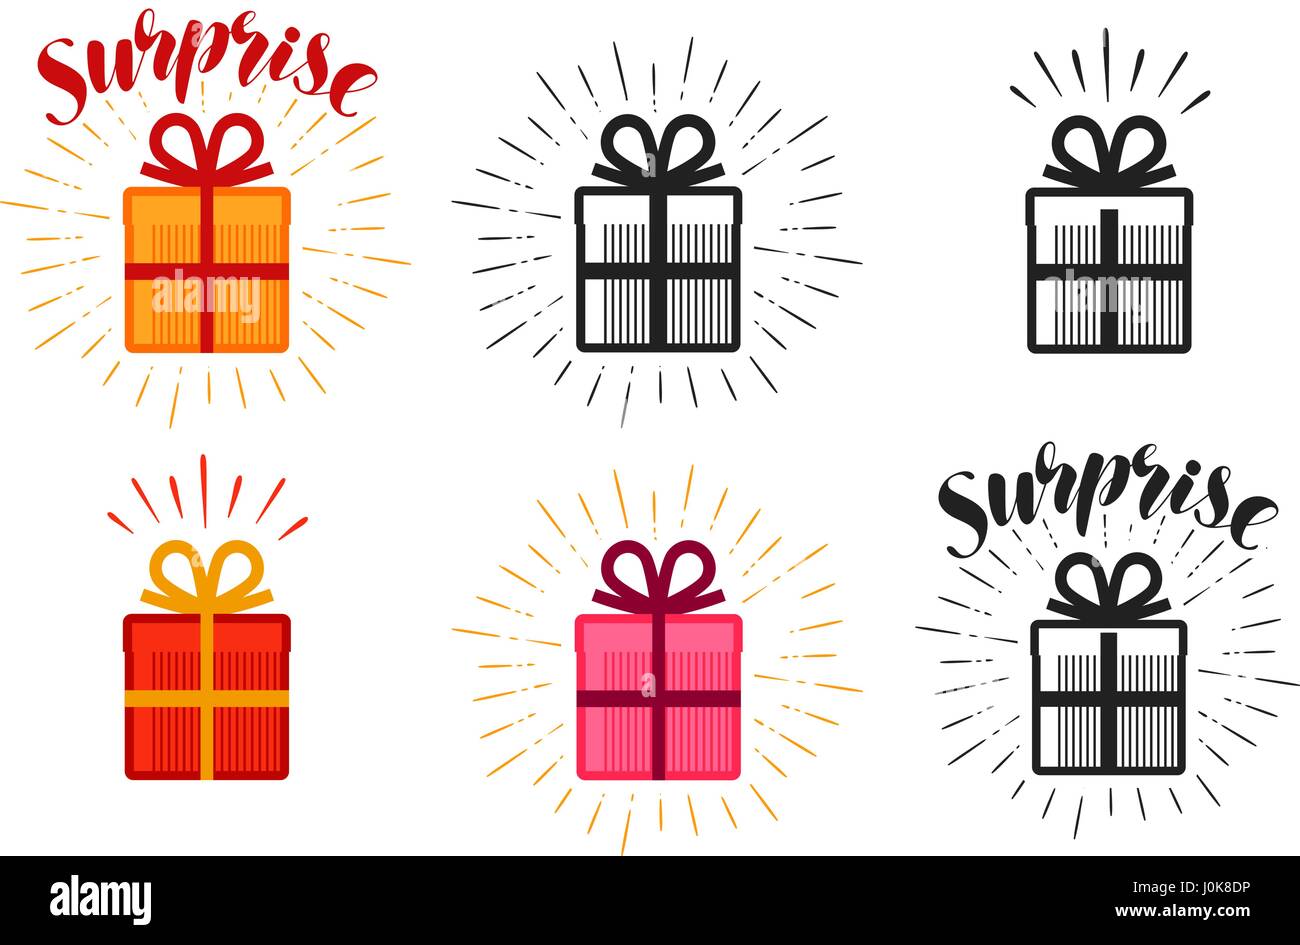 Gift box, surprise set of icons. Lettering vector illustration Stock Vector